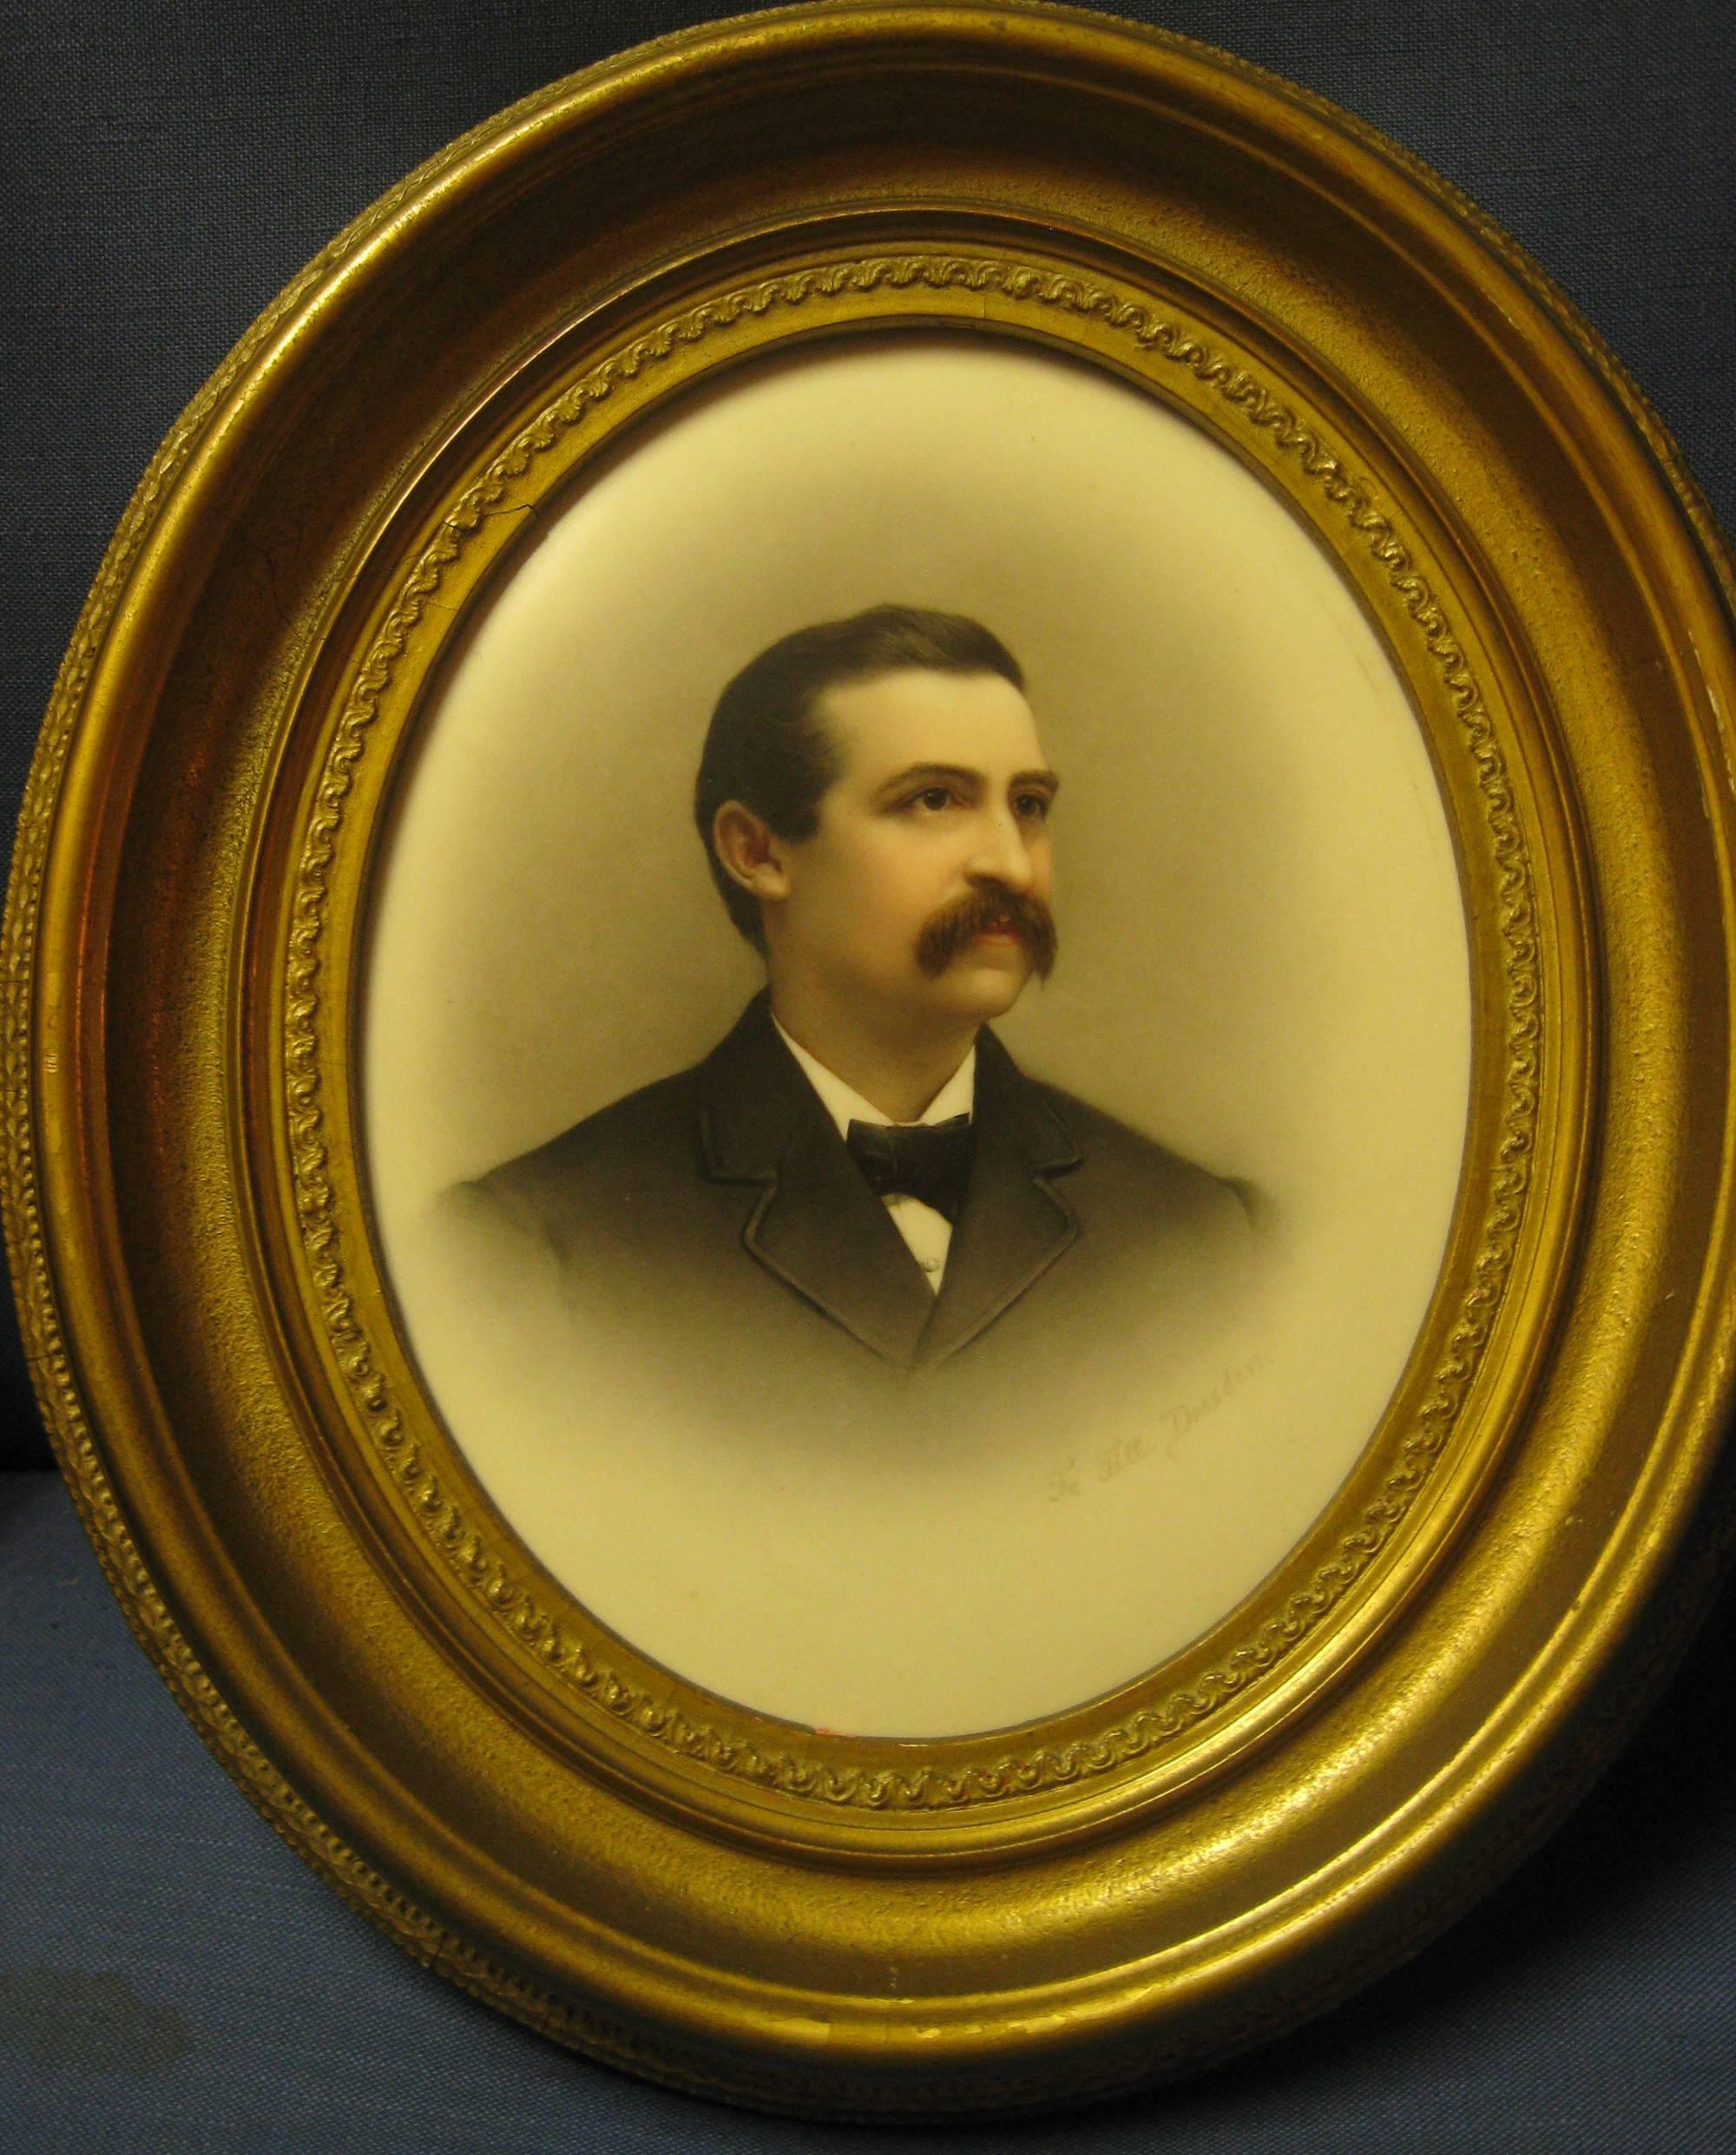 KPM or Königliche Porzellan-Manufaktur, (Royal Porcelain Factory) was one of the most influential porcelain factories to emerge in 18th-century Germany. This handsome moustached gentleman is S.J. Thurbro. The finely hand-painted KPM portrait on a